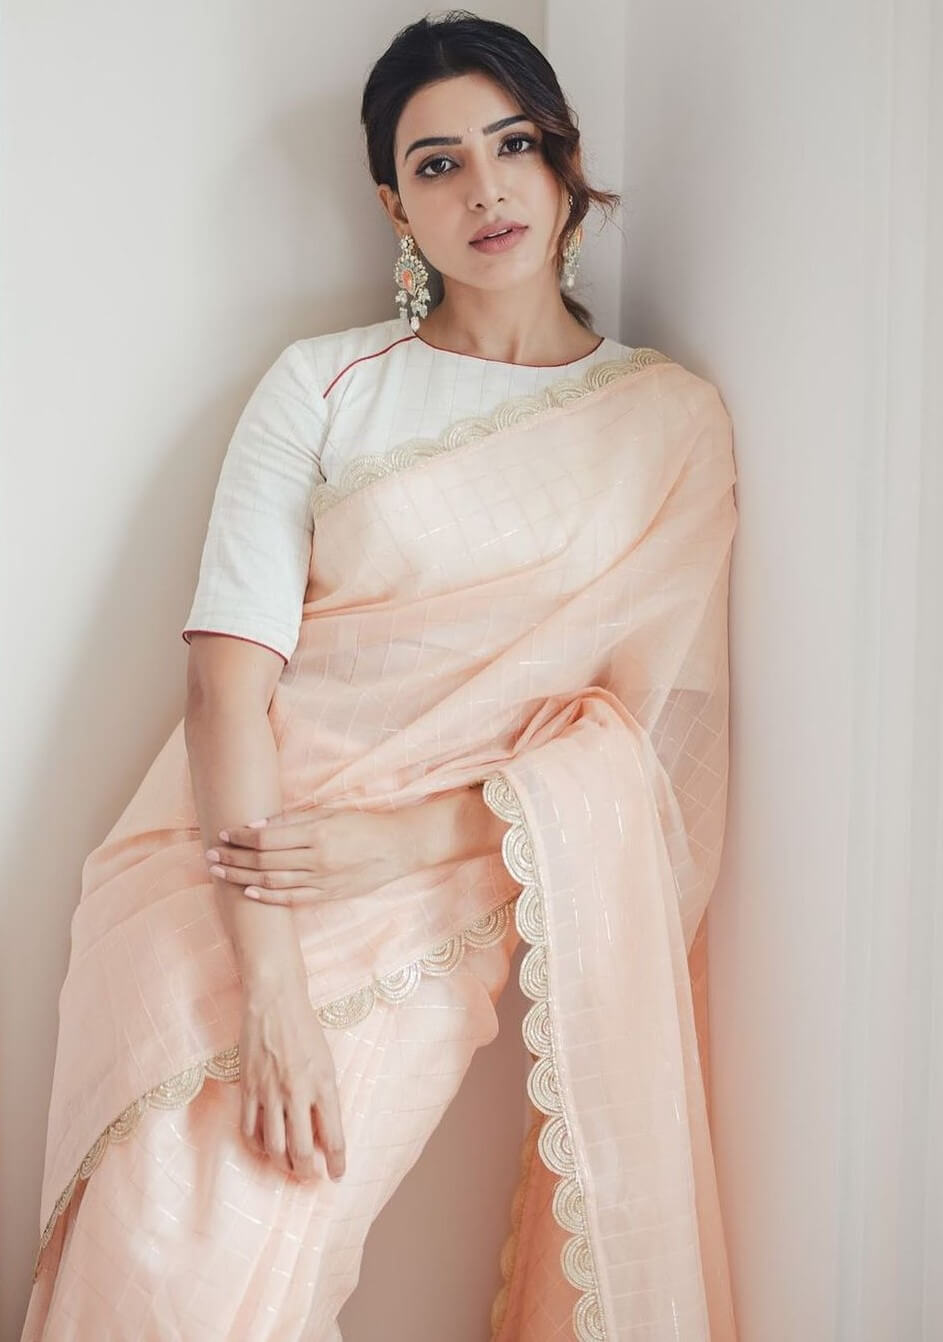 Pushpa: The Rise Movie Actress In Peach Color Saree With Half Sleeve Blouse